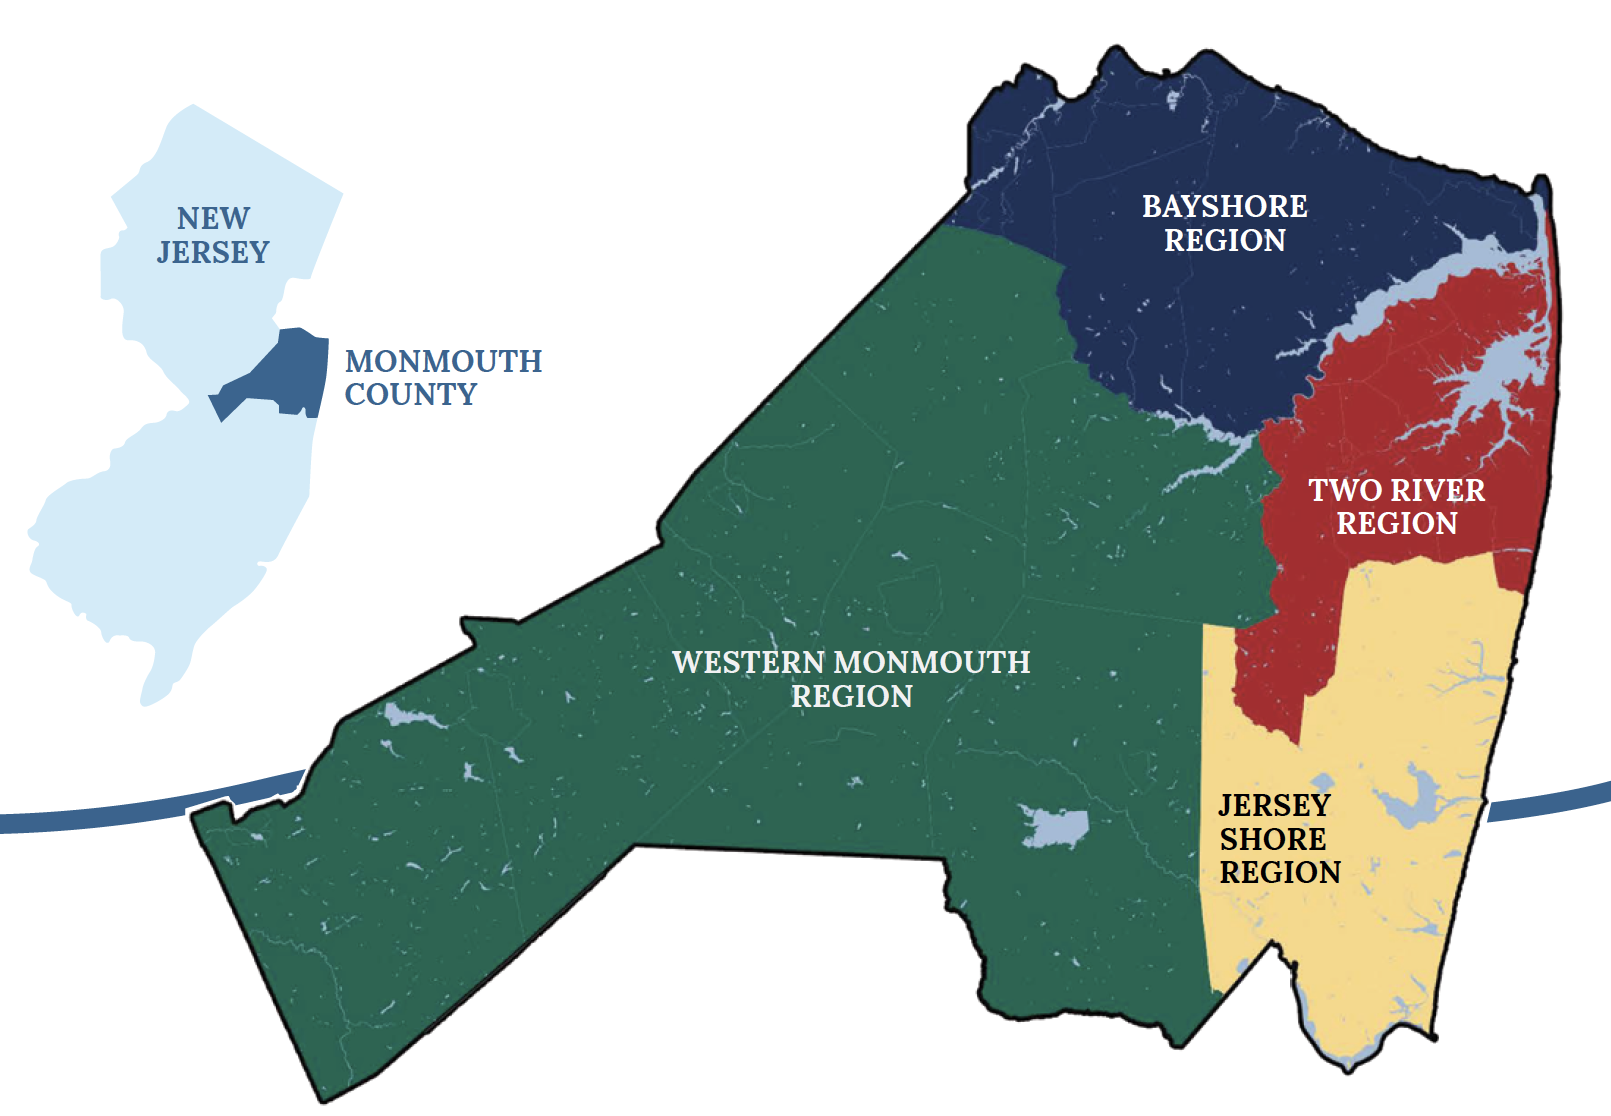 The four regions of Monmouth County